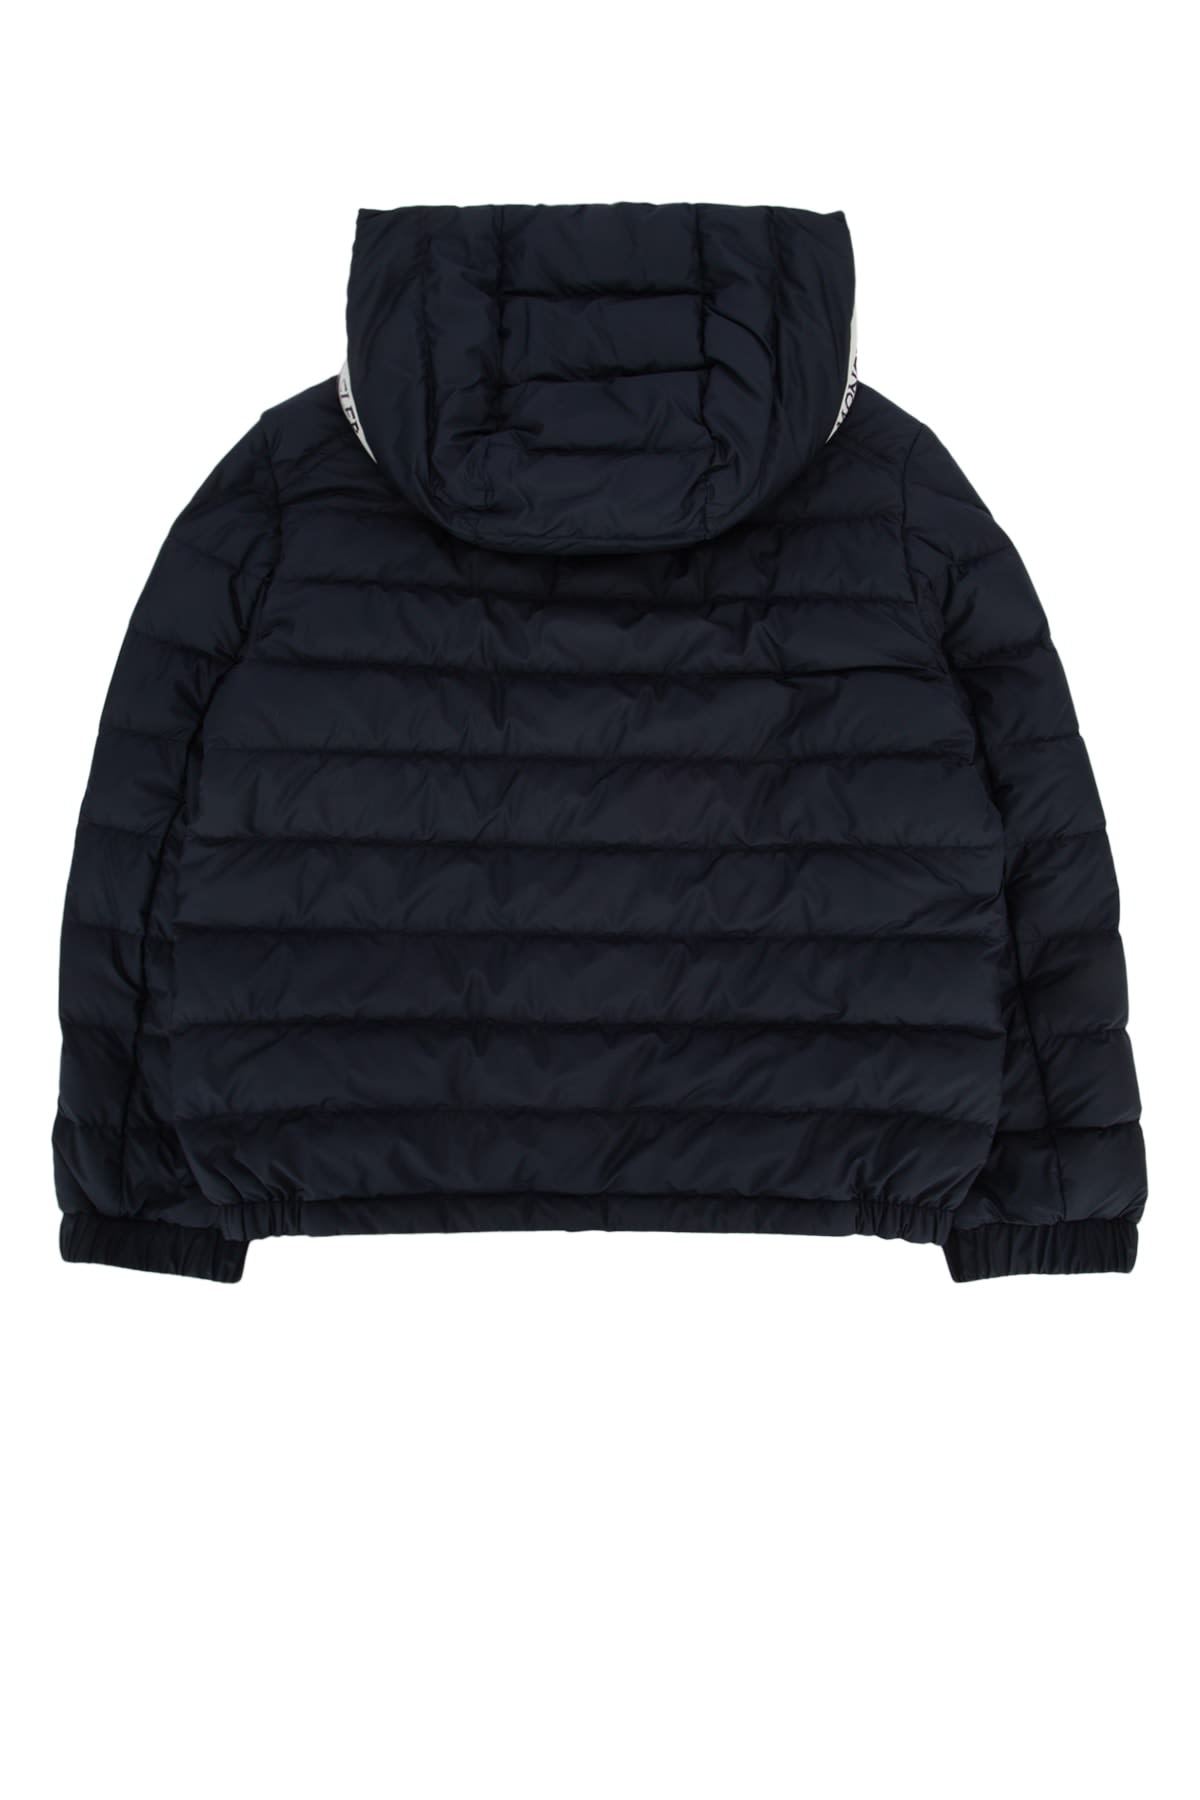 Moncler Kids' Giacca In 77g